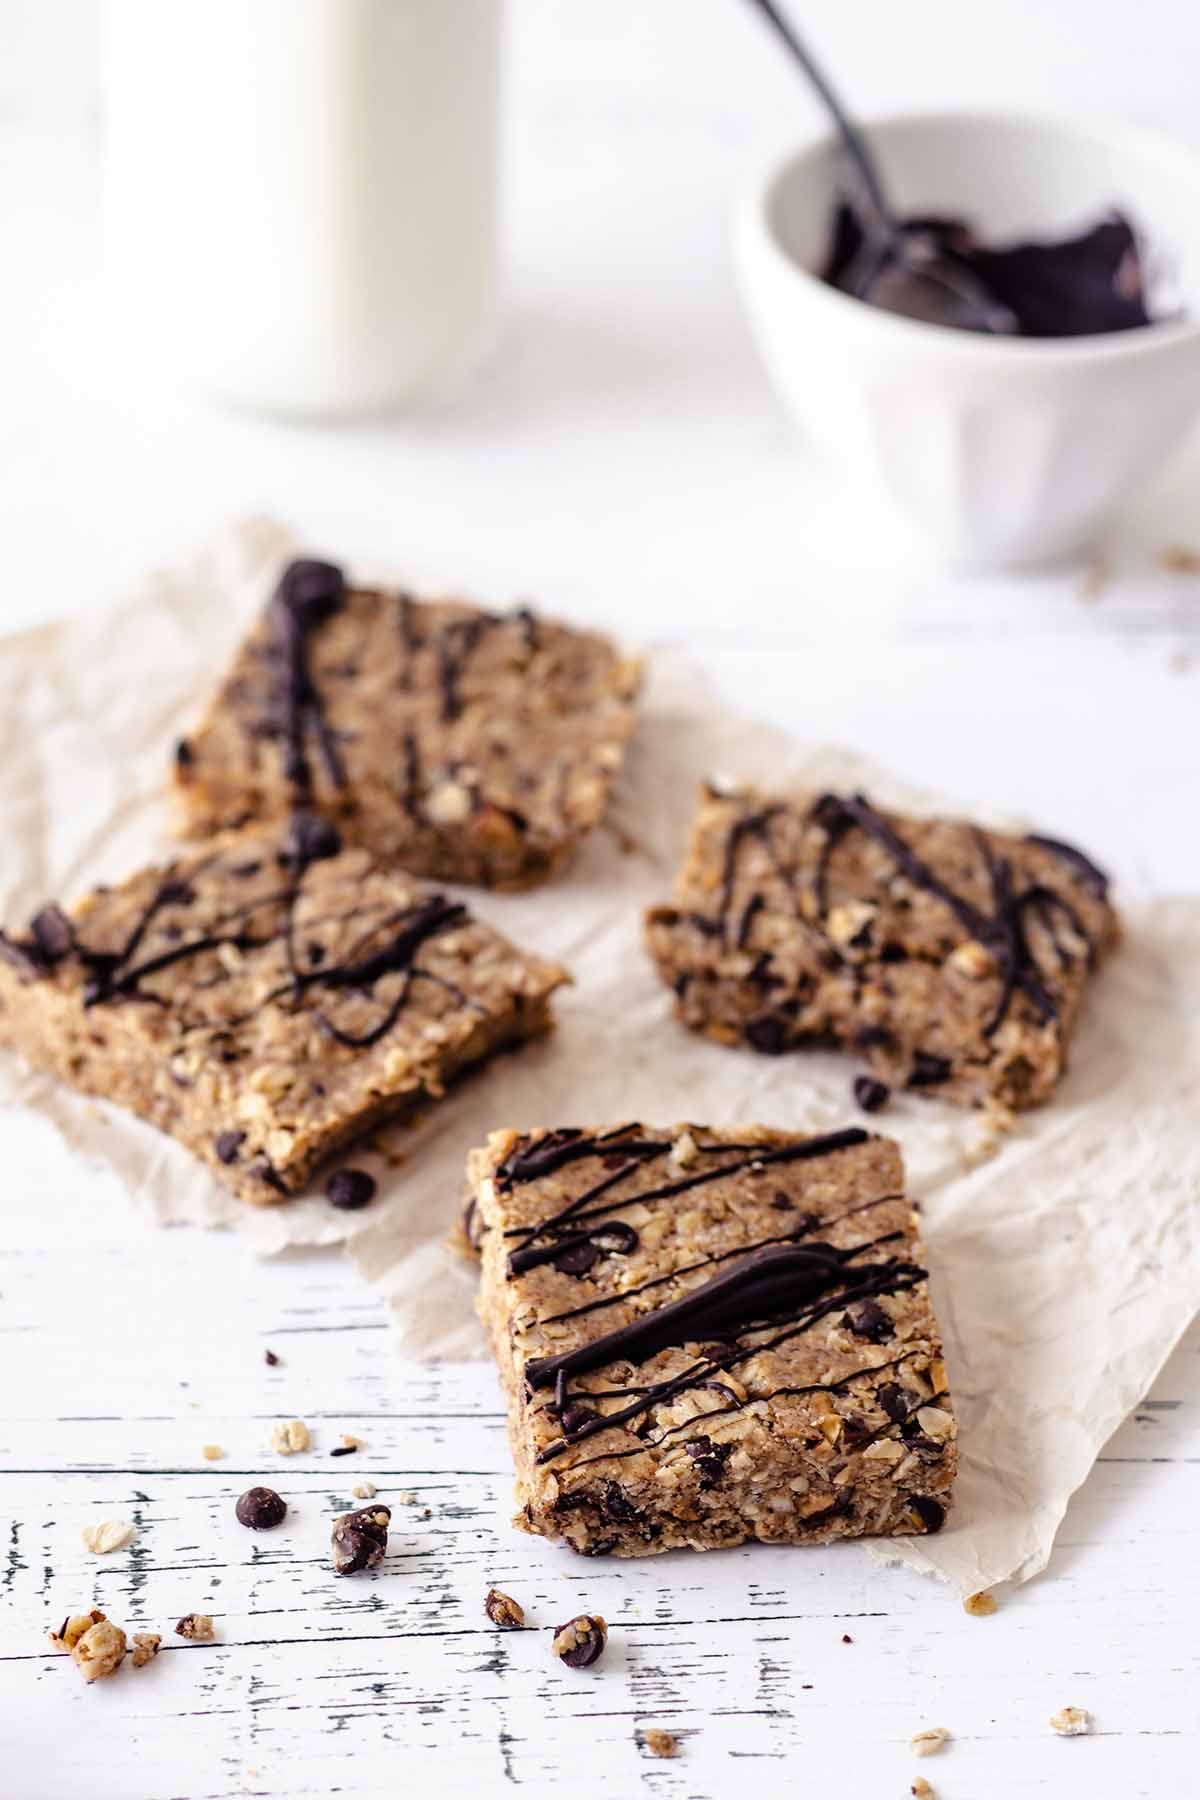 Four no bake oatmeal peanut butter bars on a piece of crumpled paper on a distressed white wood surface